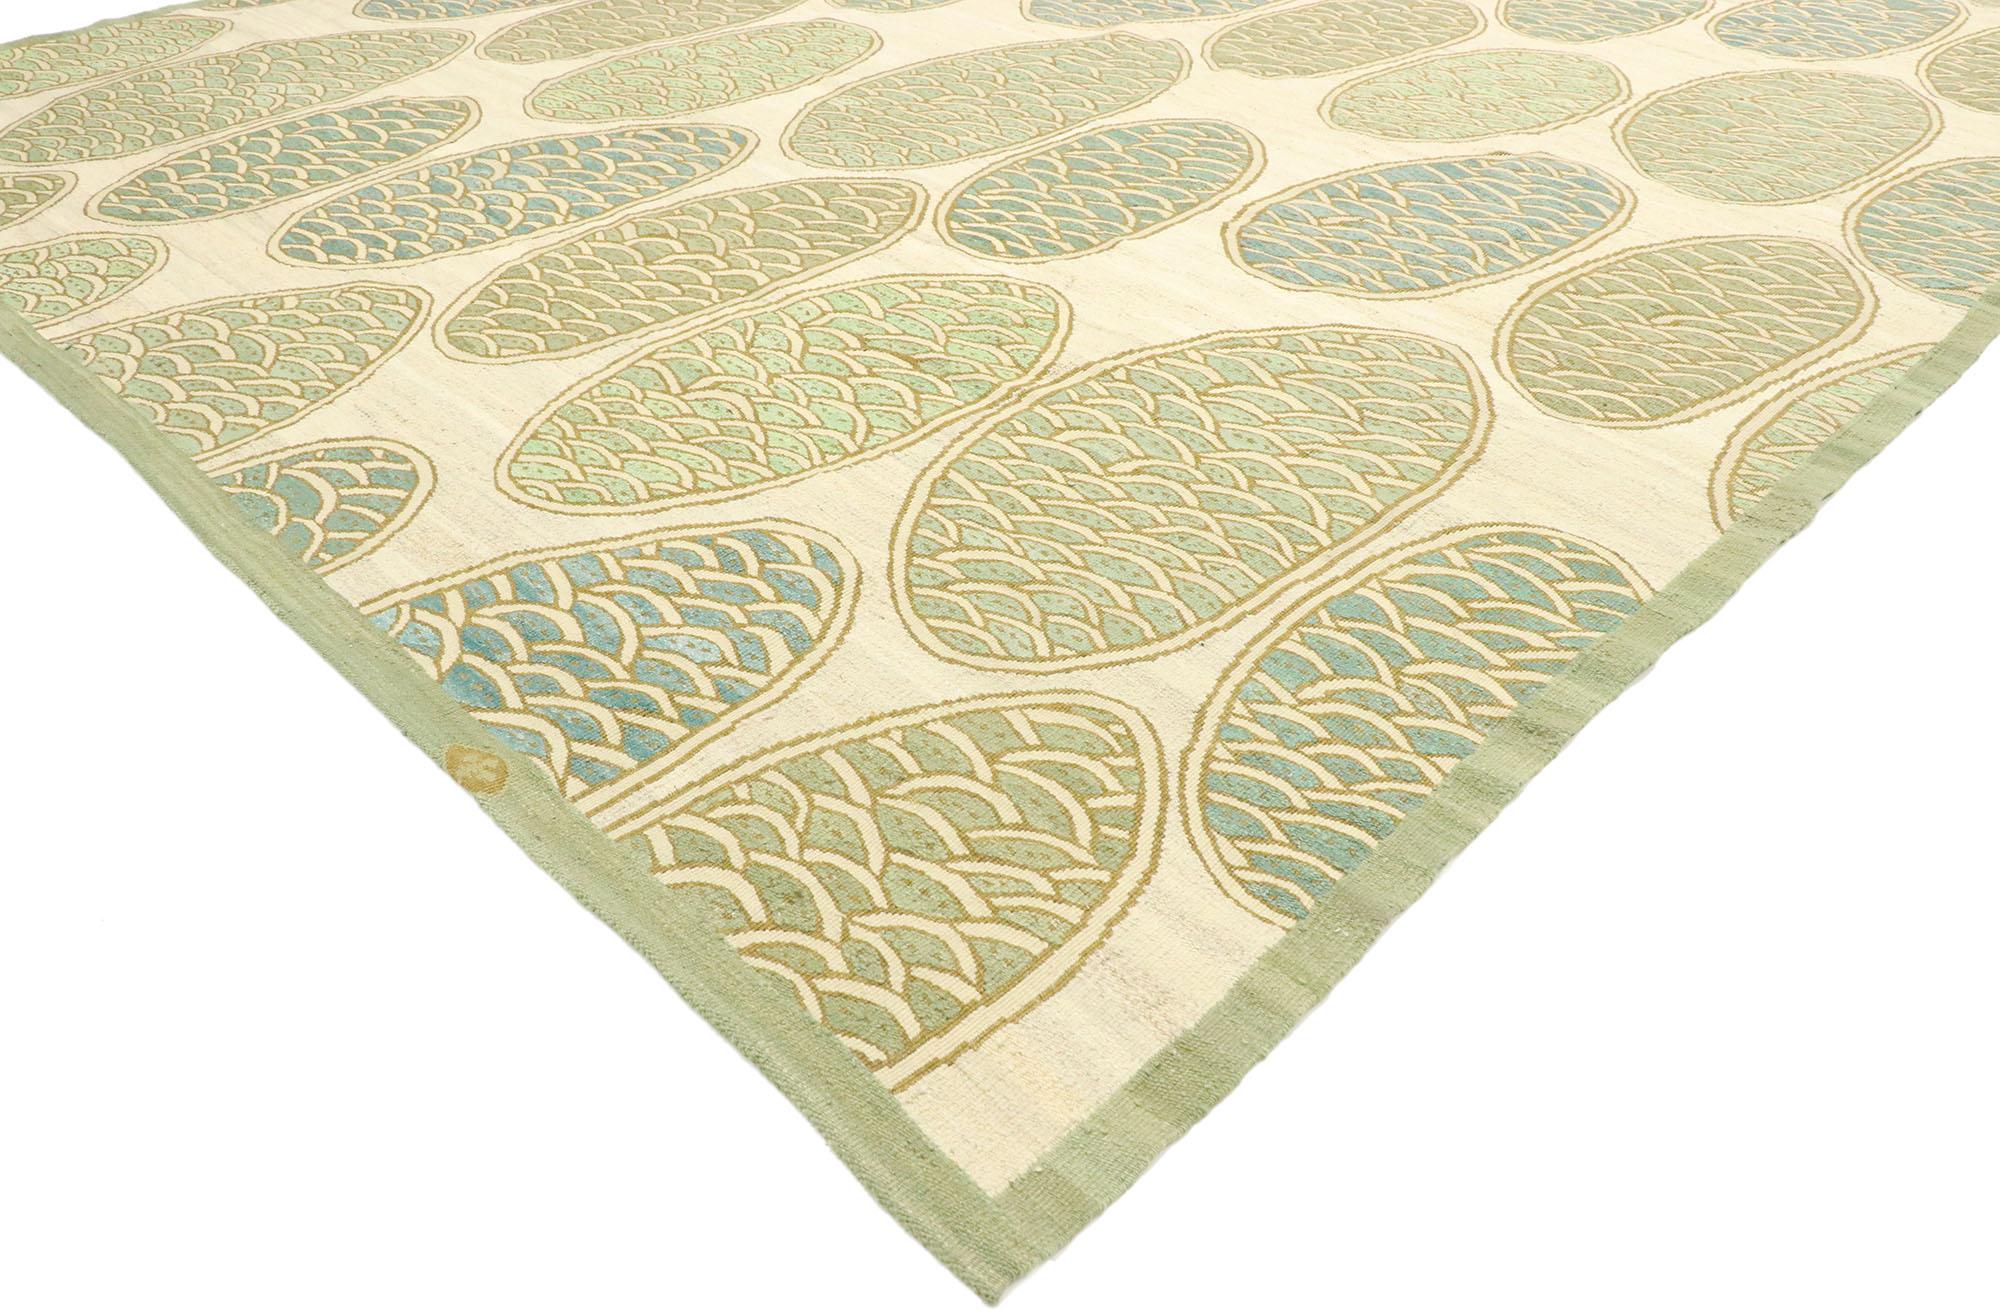 77528 Antique French Aubusson Modern Area rug with Scalloped Orb Pattern and Biophilic Design. Drawing inspiration from Robert Delaunay and Sonia Delaunay with Japanese influence, this handwoven wool antique French Aubusson rug is the perfect